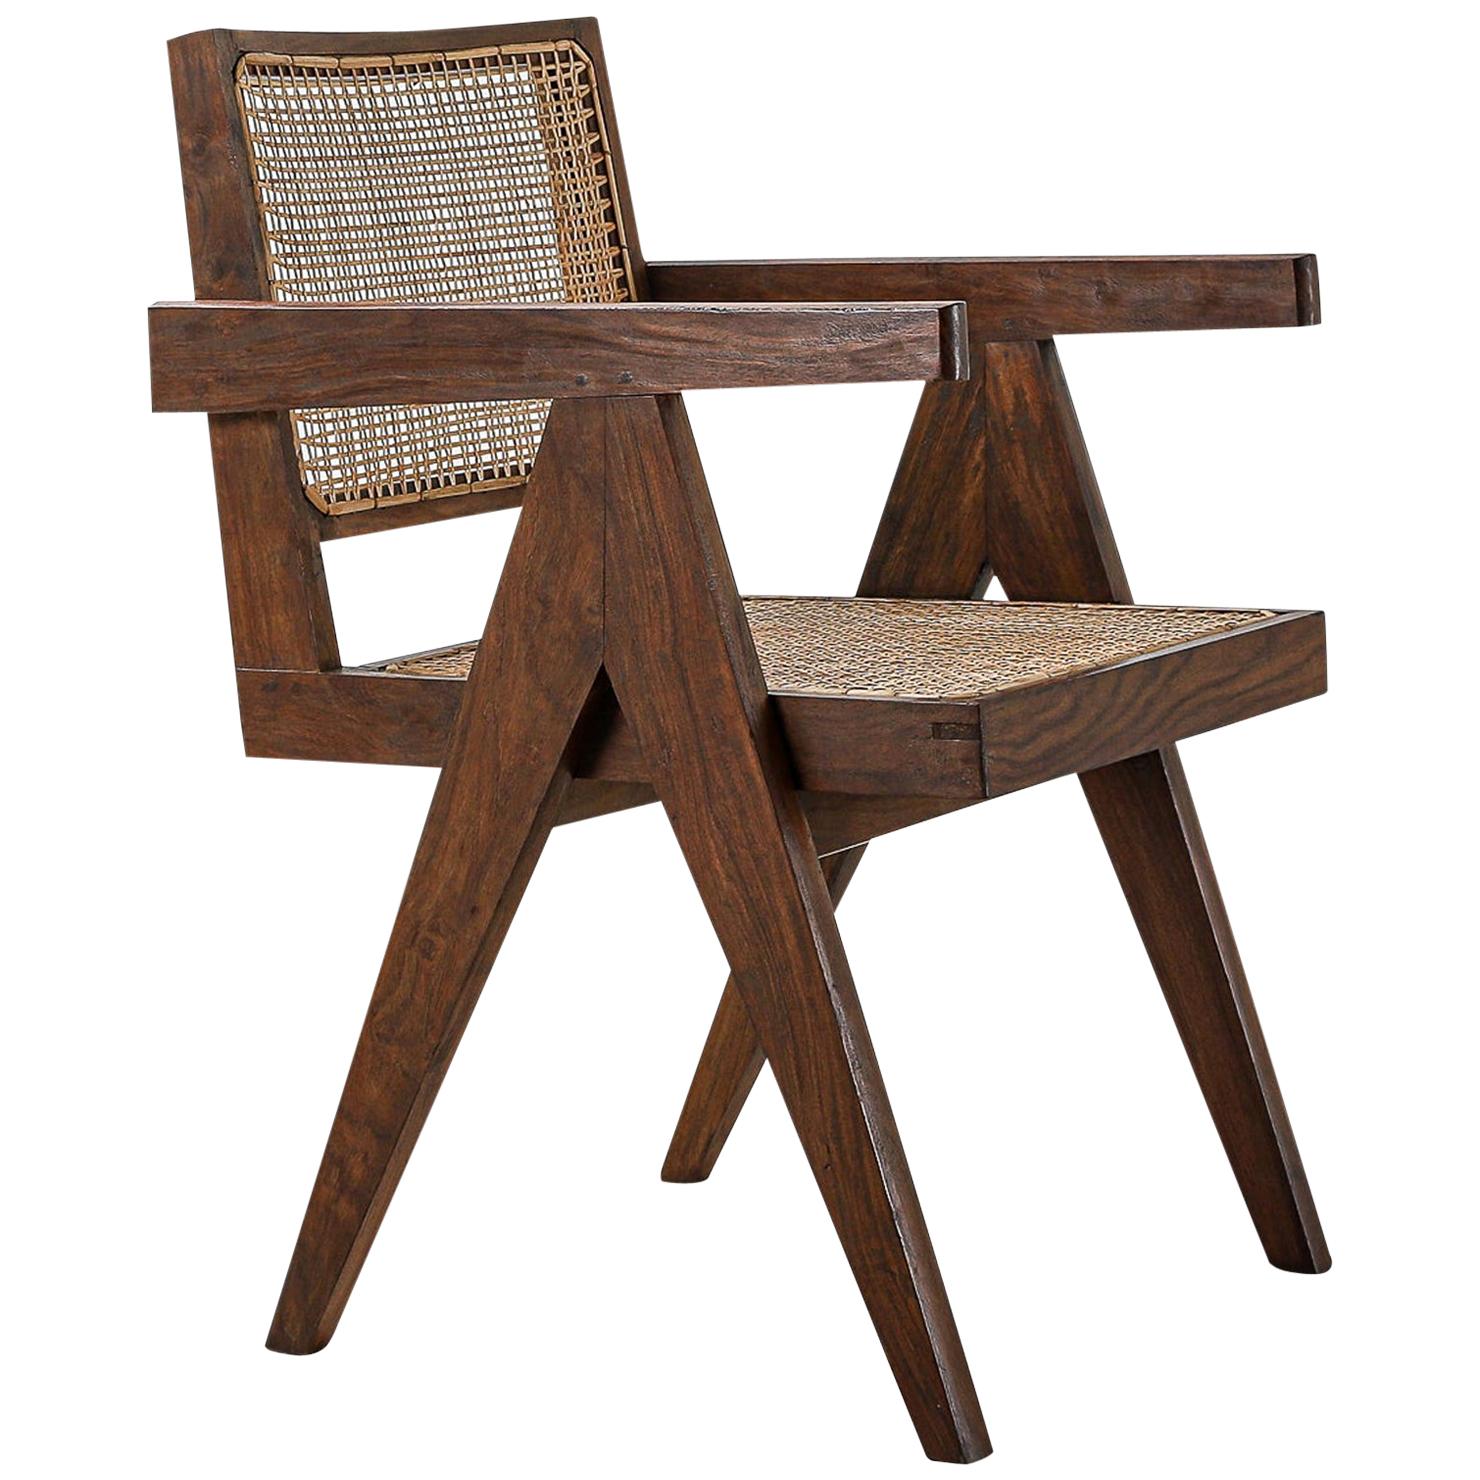 Pair of Pierre Jeanneret Office Chair, Variant, circa 1953-1954